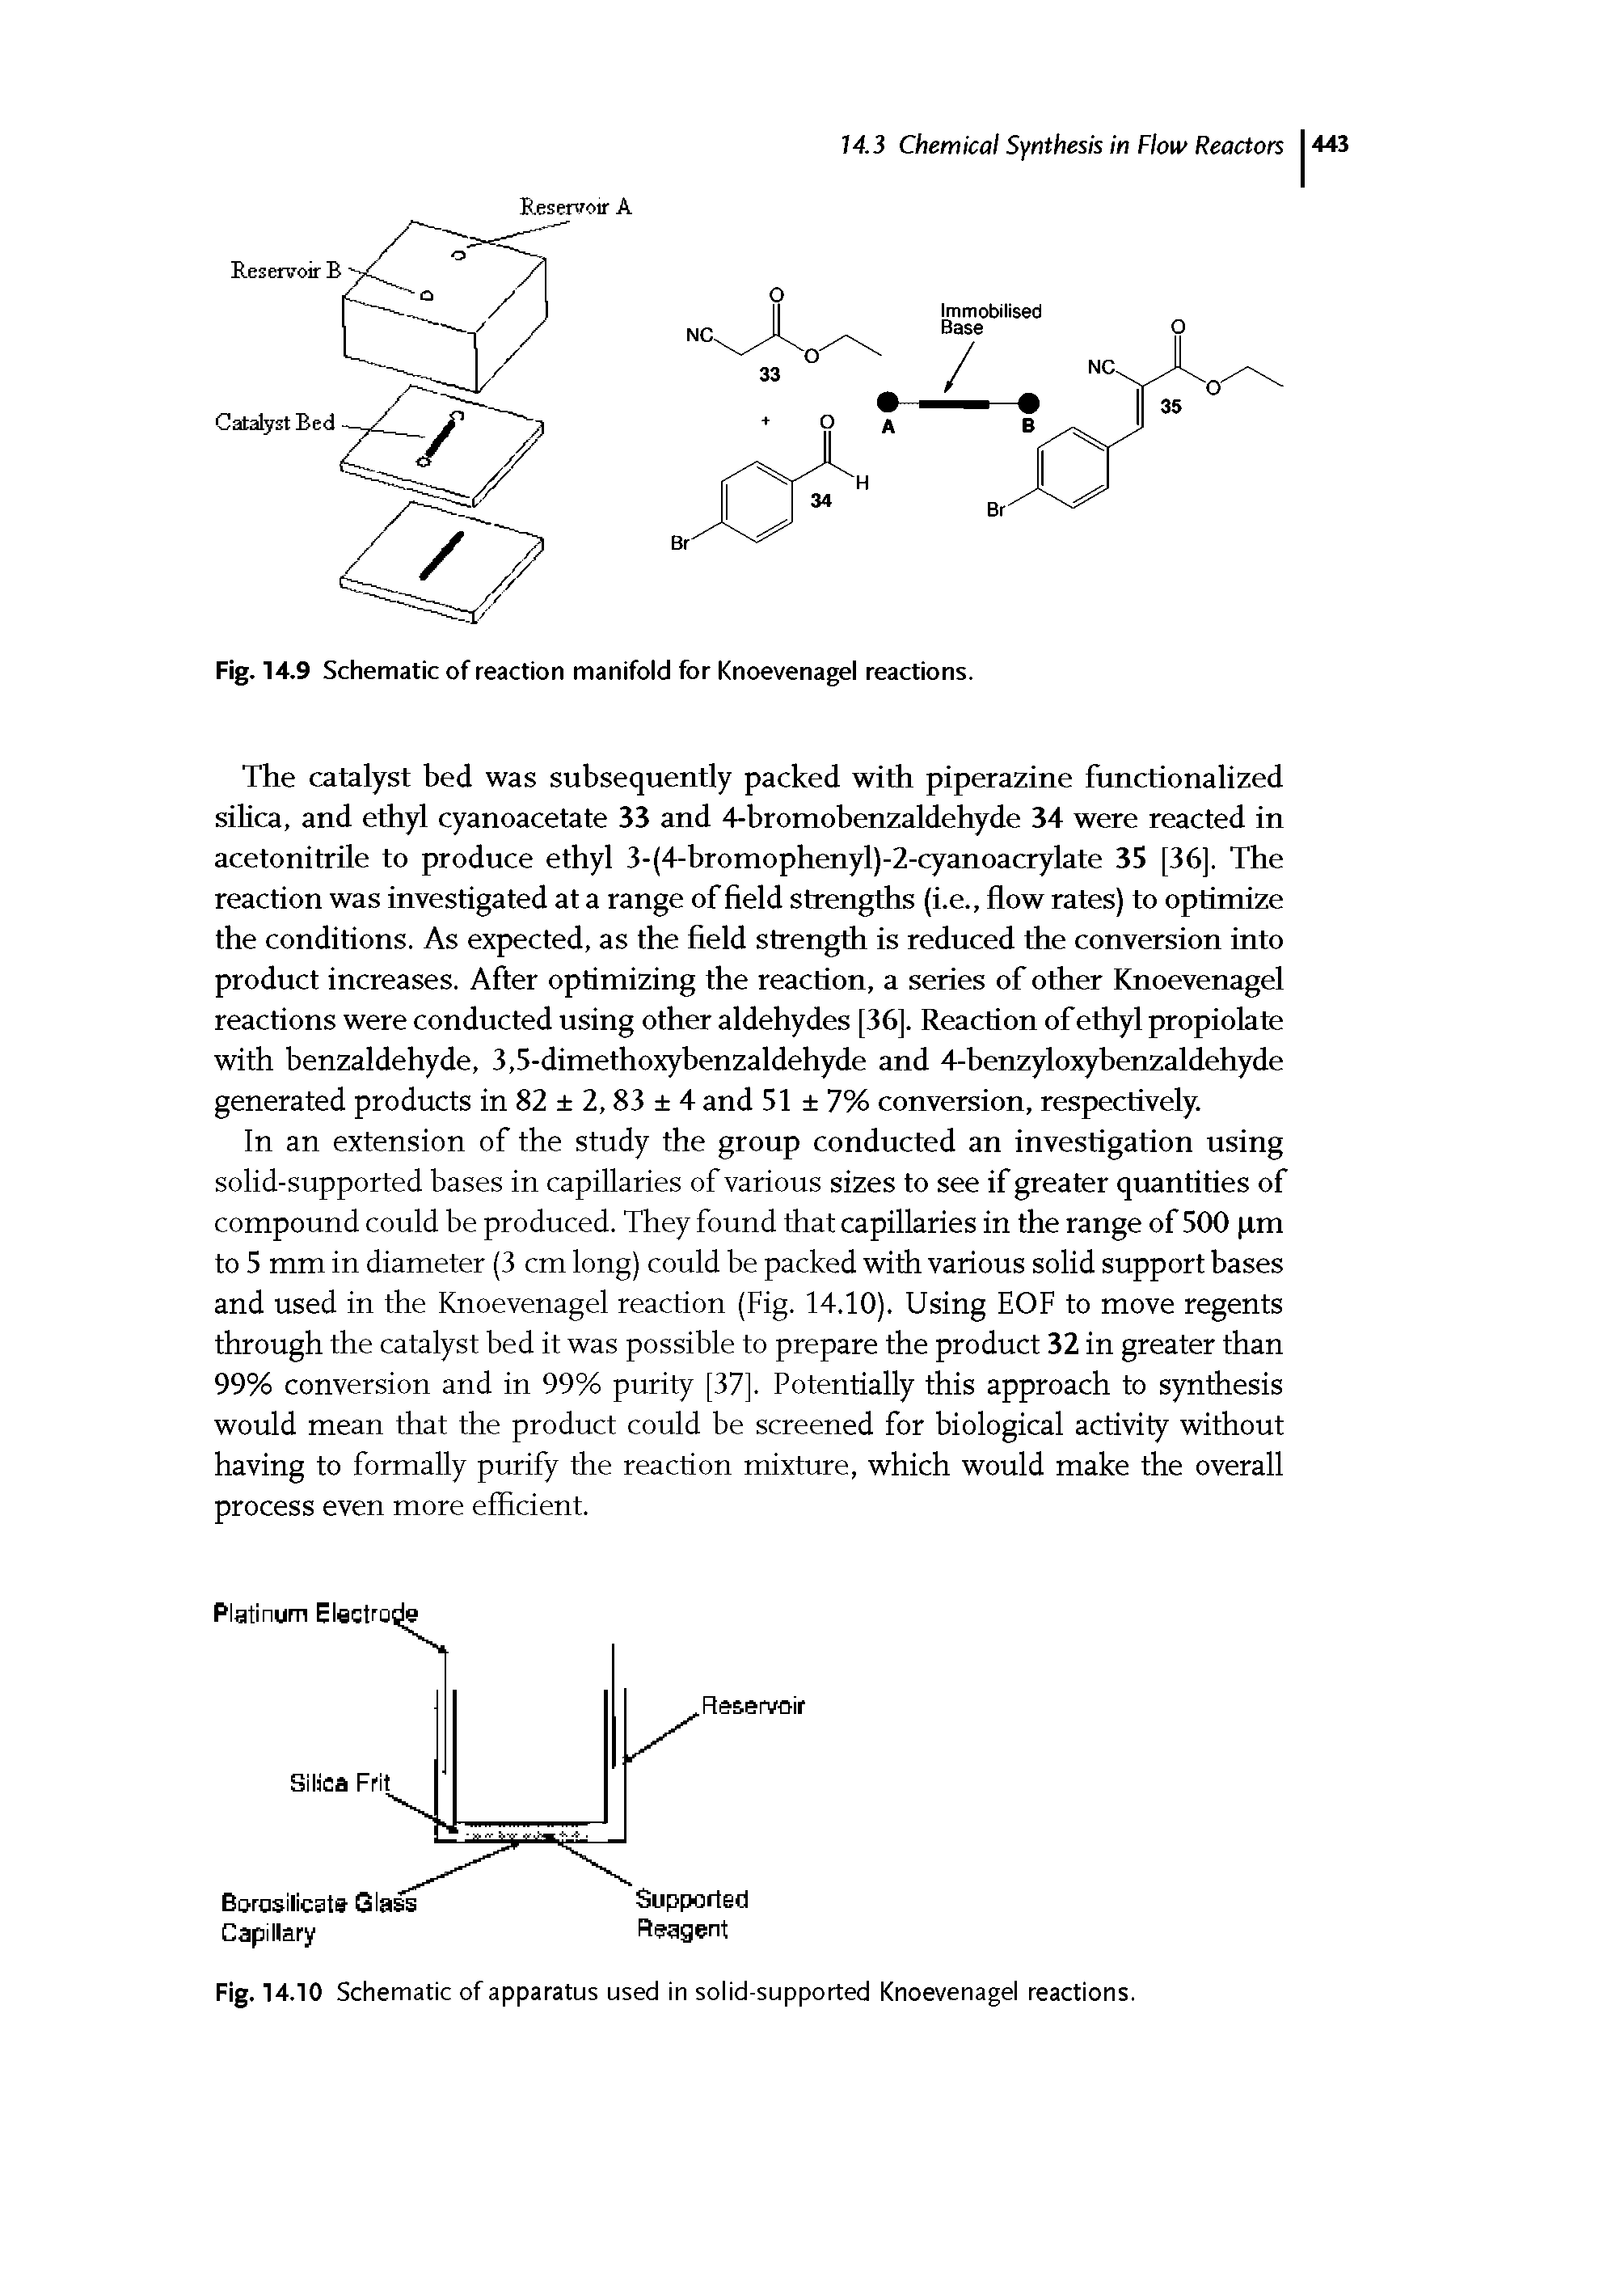 Fig. 14.10 Schematic of apparatus used in solid-supported Knoevenagel reactions.